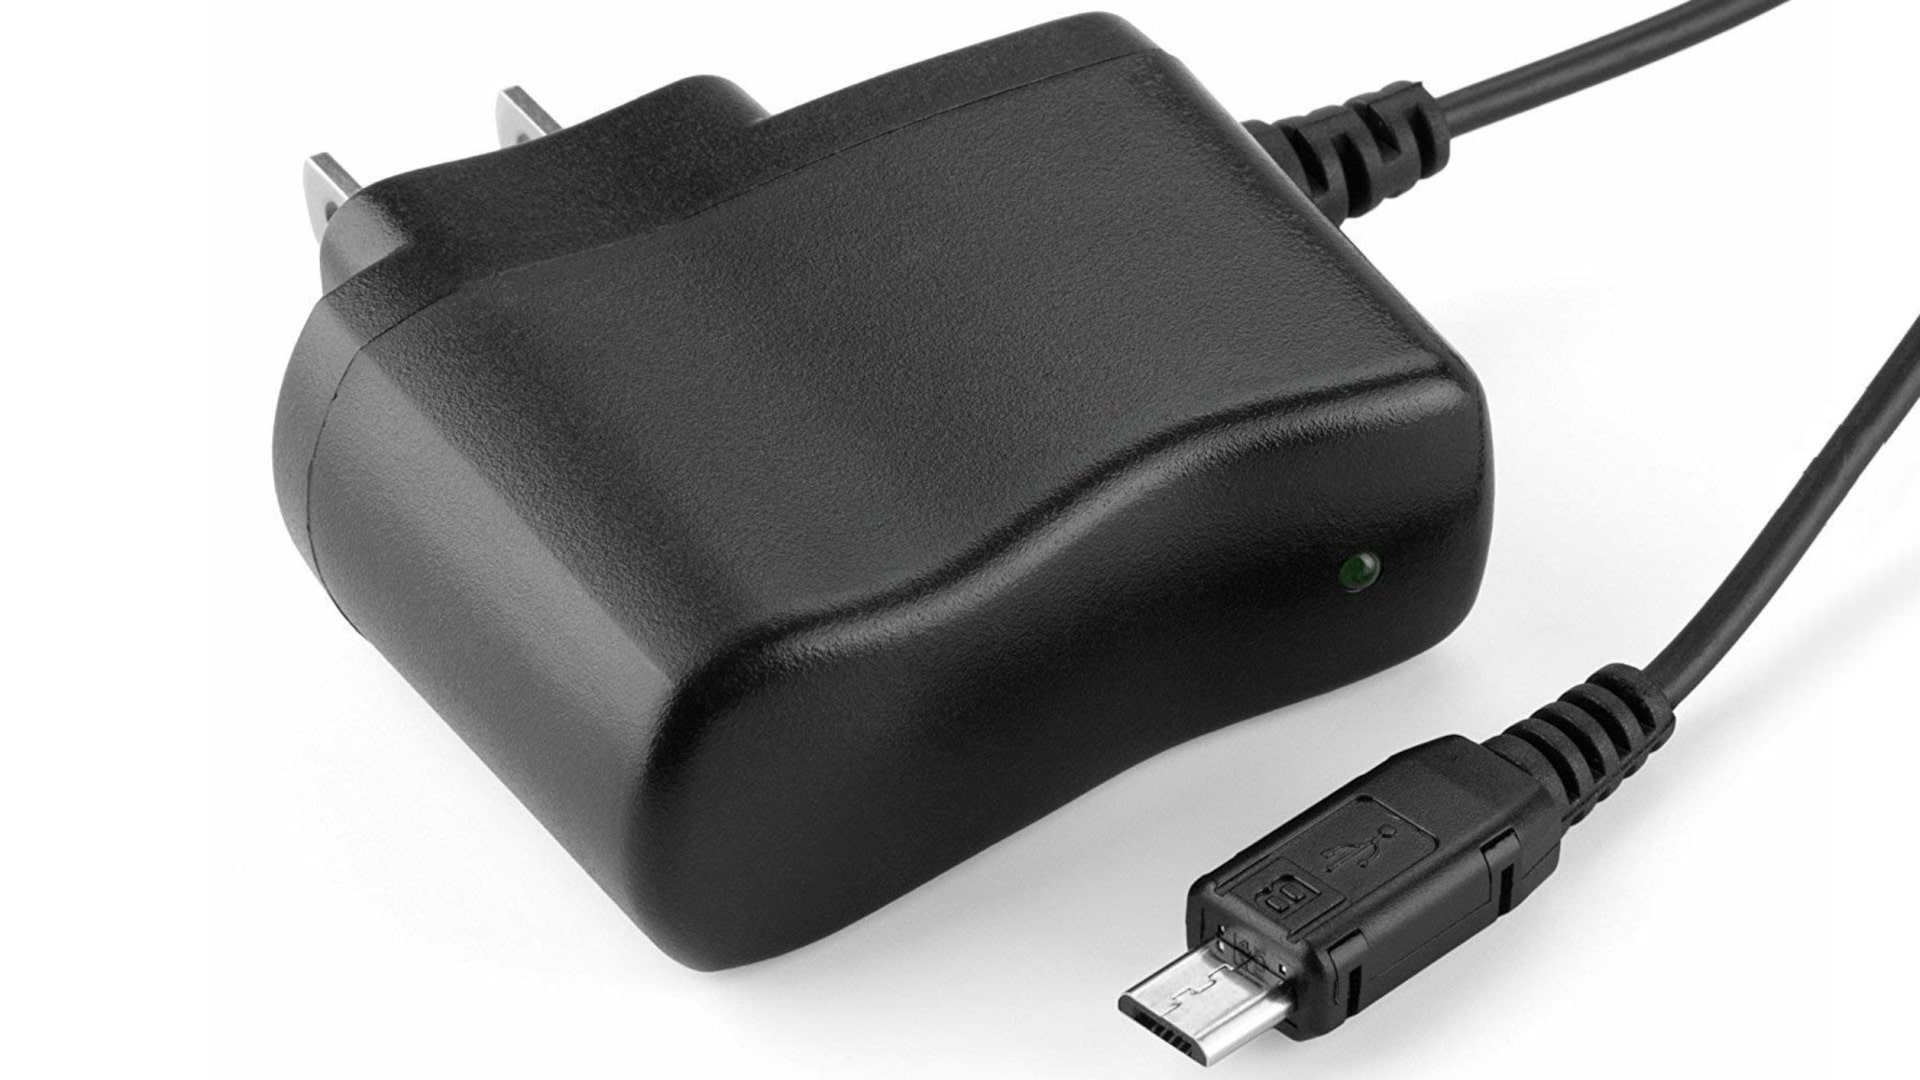 ACER Iconia A1 830 Charger